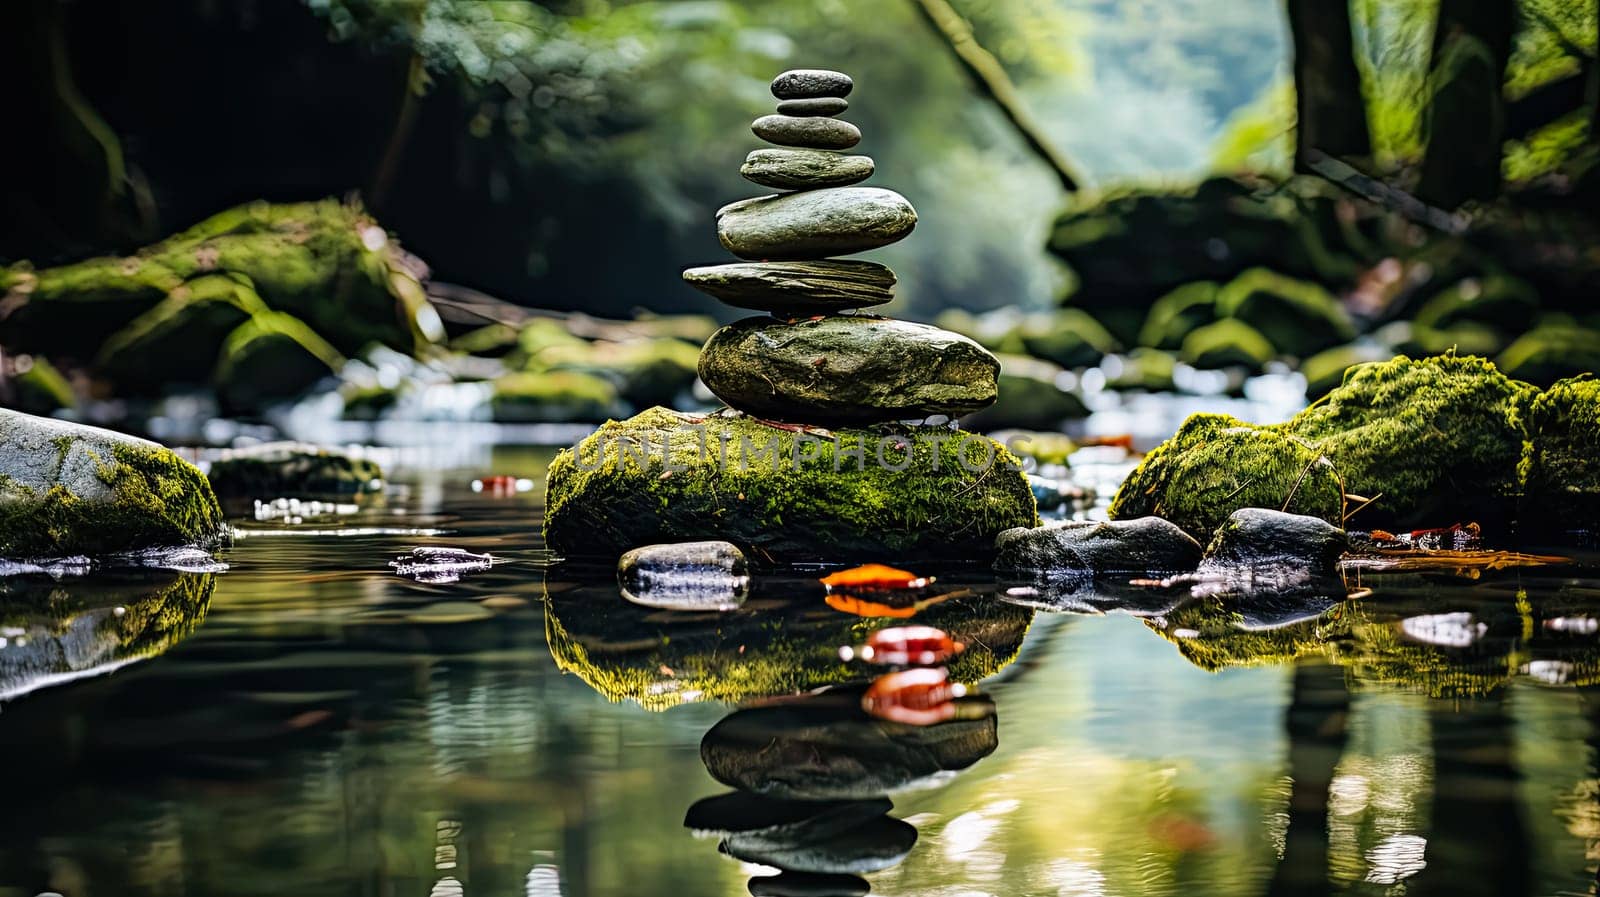 Witness the serene beauty of a balance of stones in a flowing river, a harmonious arrangement that captures the tranquility of nature's delicate equilibrium.